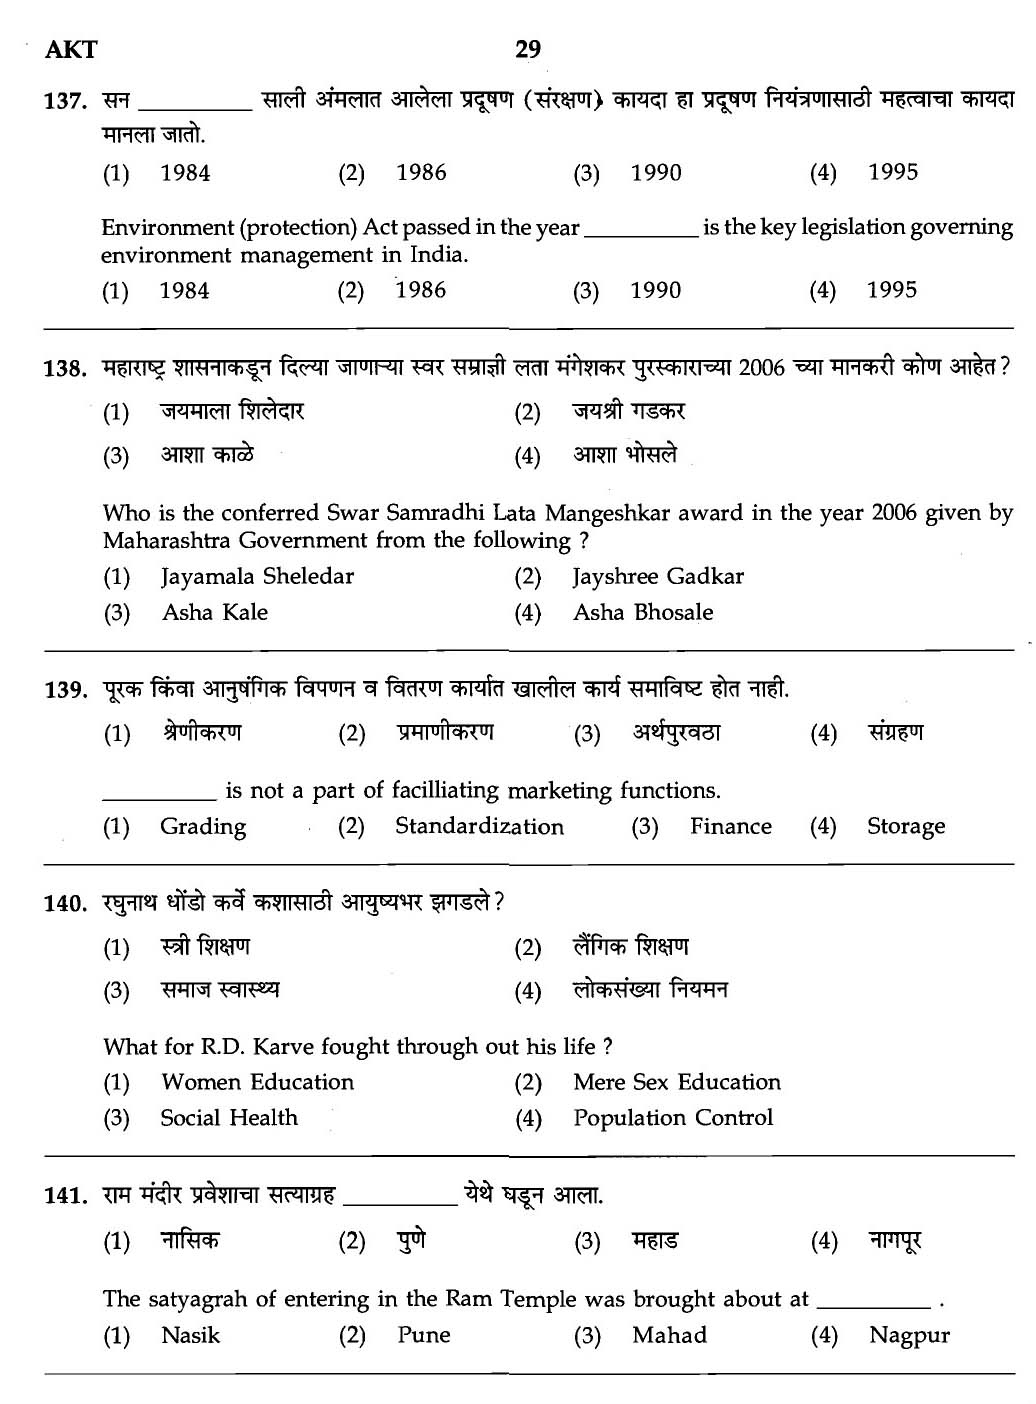 MPSC Agricultural Services Exam 2007 General Question Paper 27